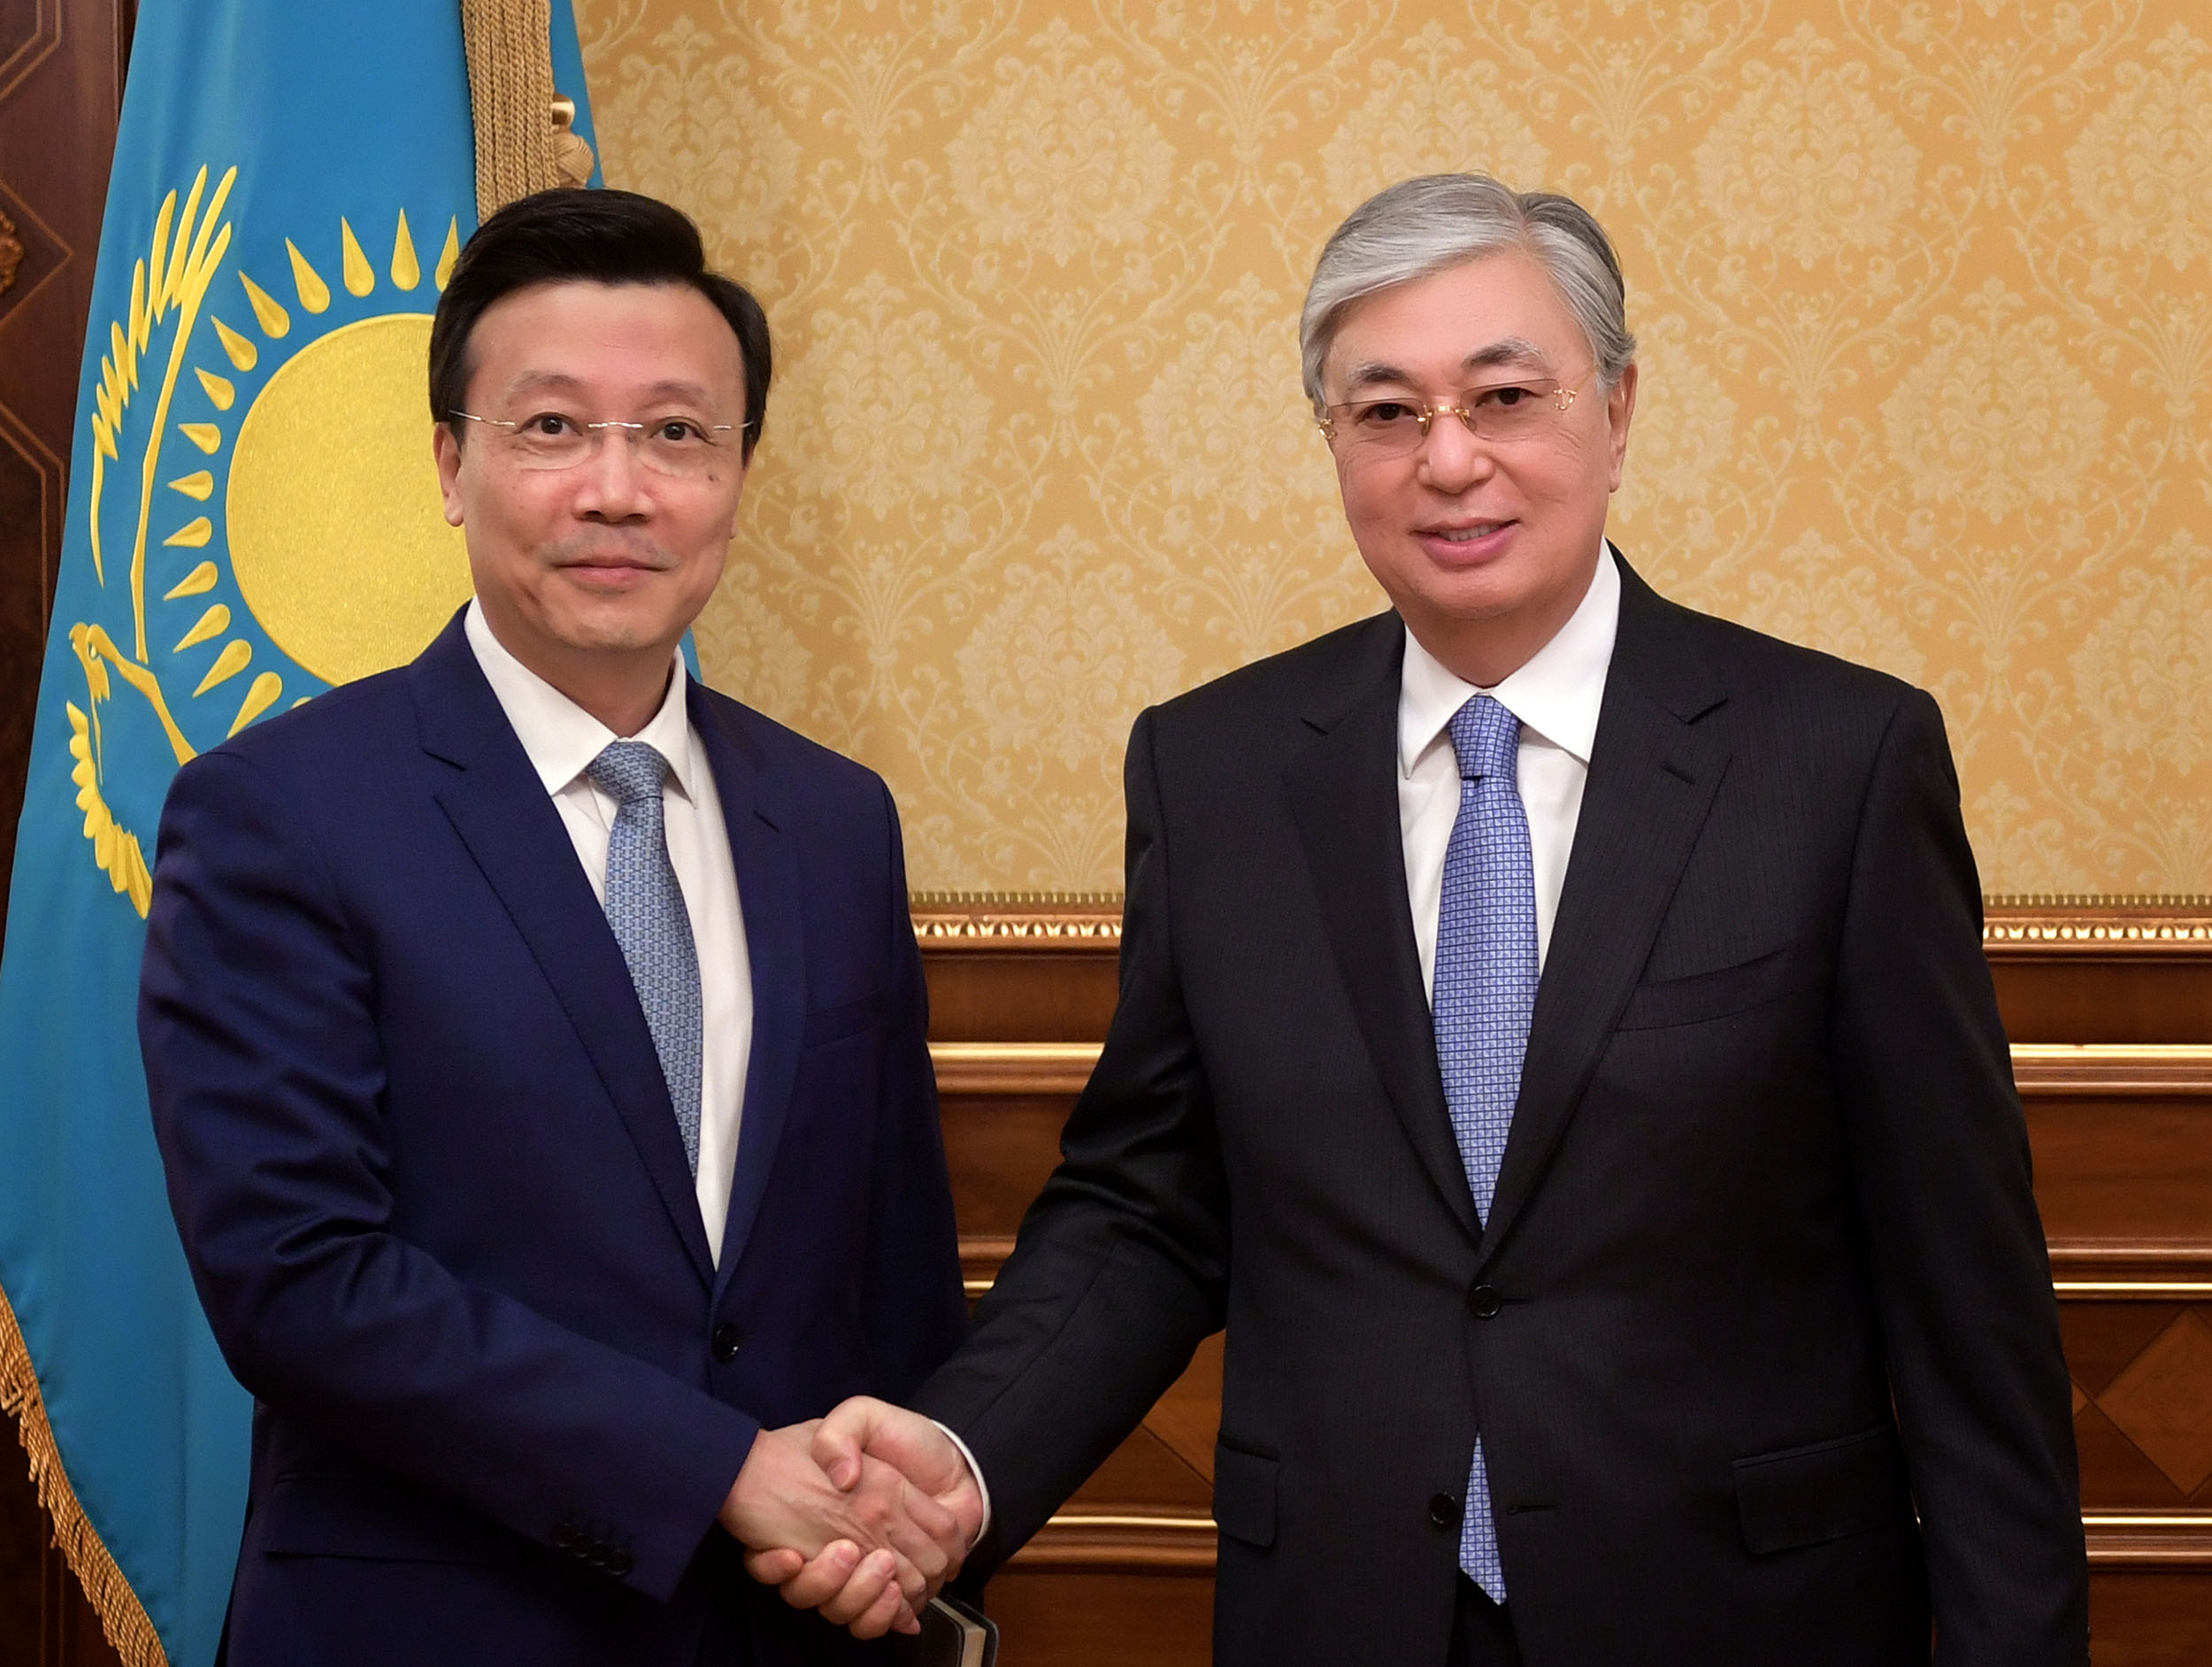 The Head of State receives Zhang Xiao, Ambassador of China